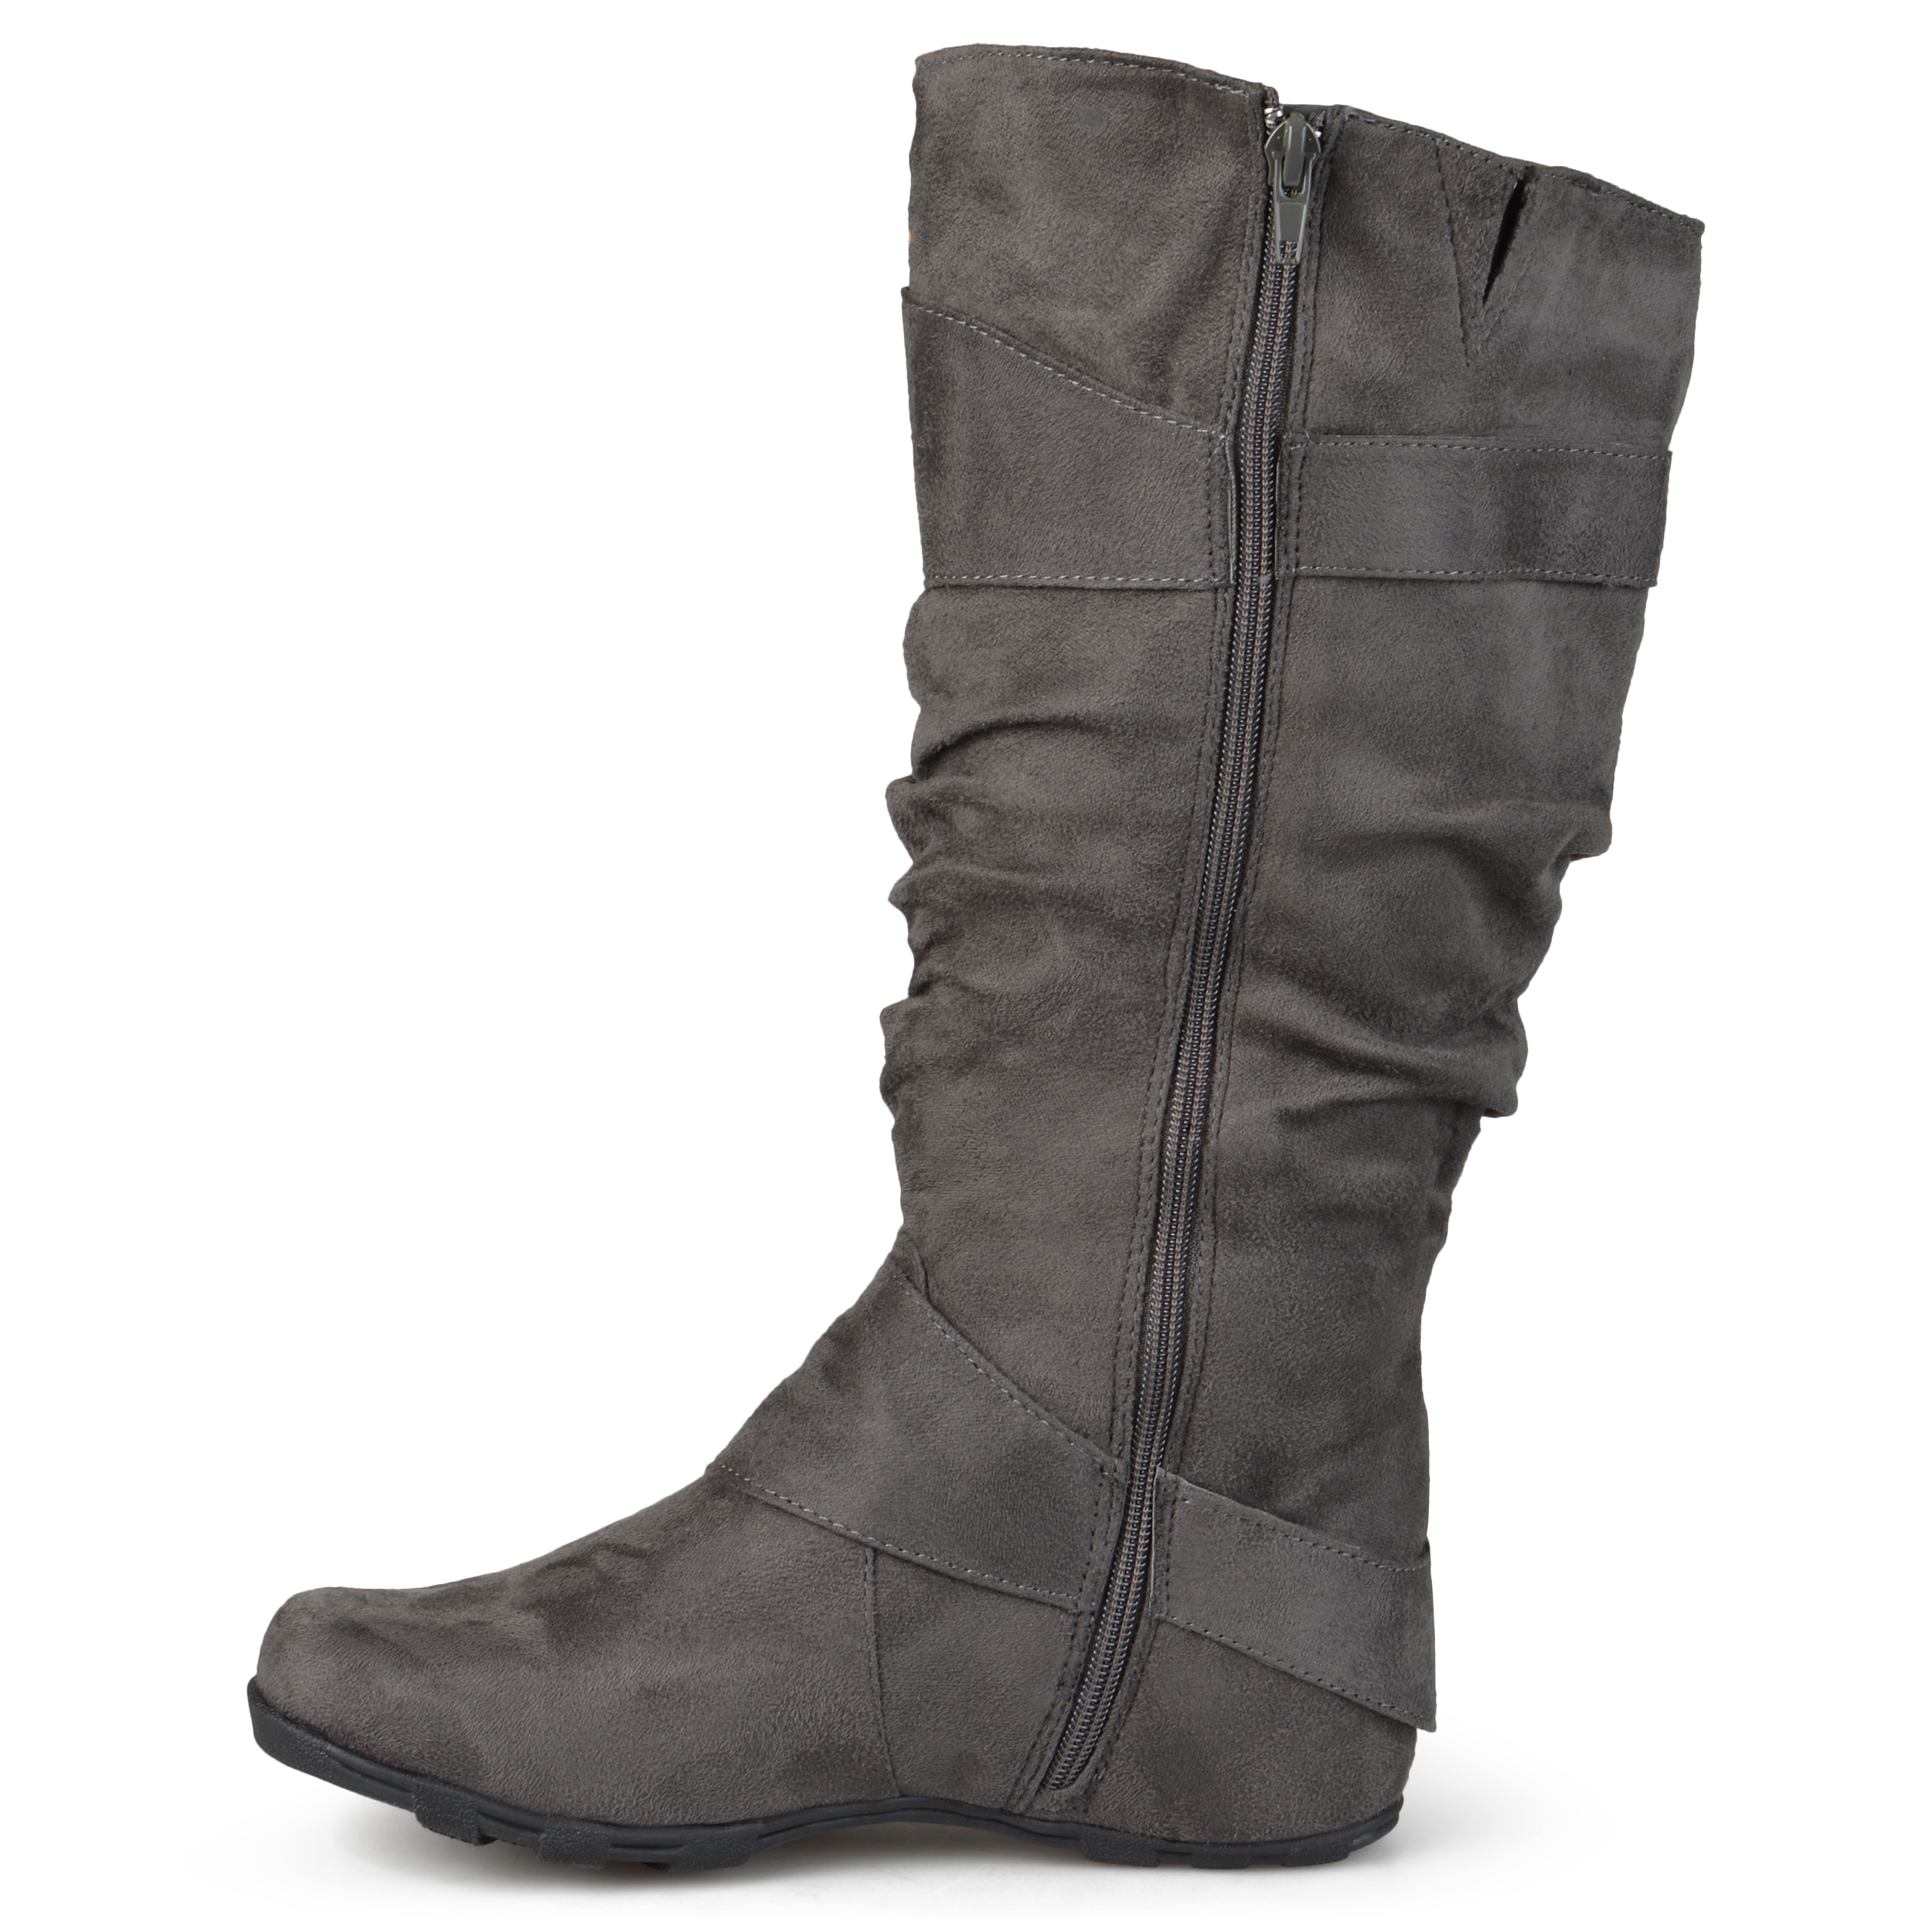 Brinley Co. Women's Extra Wide Calf Mid-Calf Slouch Riding Boots - image 3 of 8